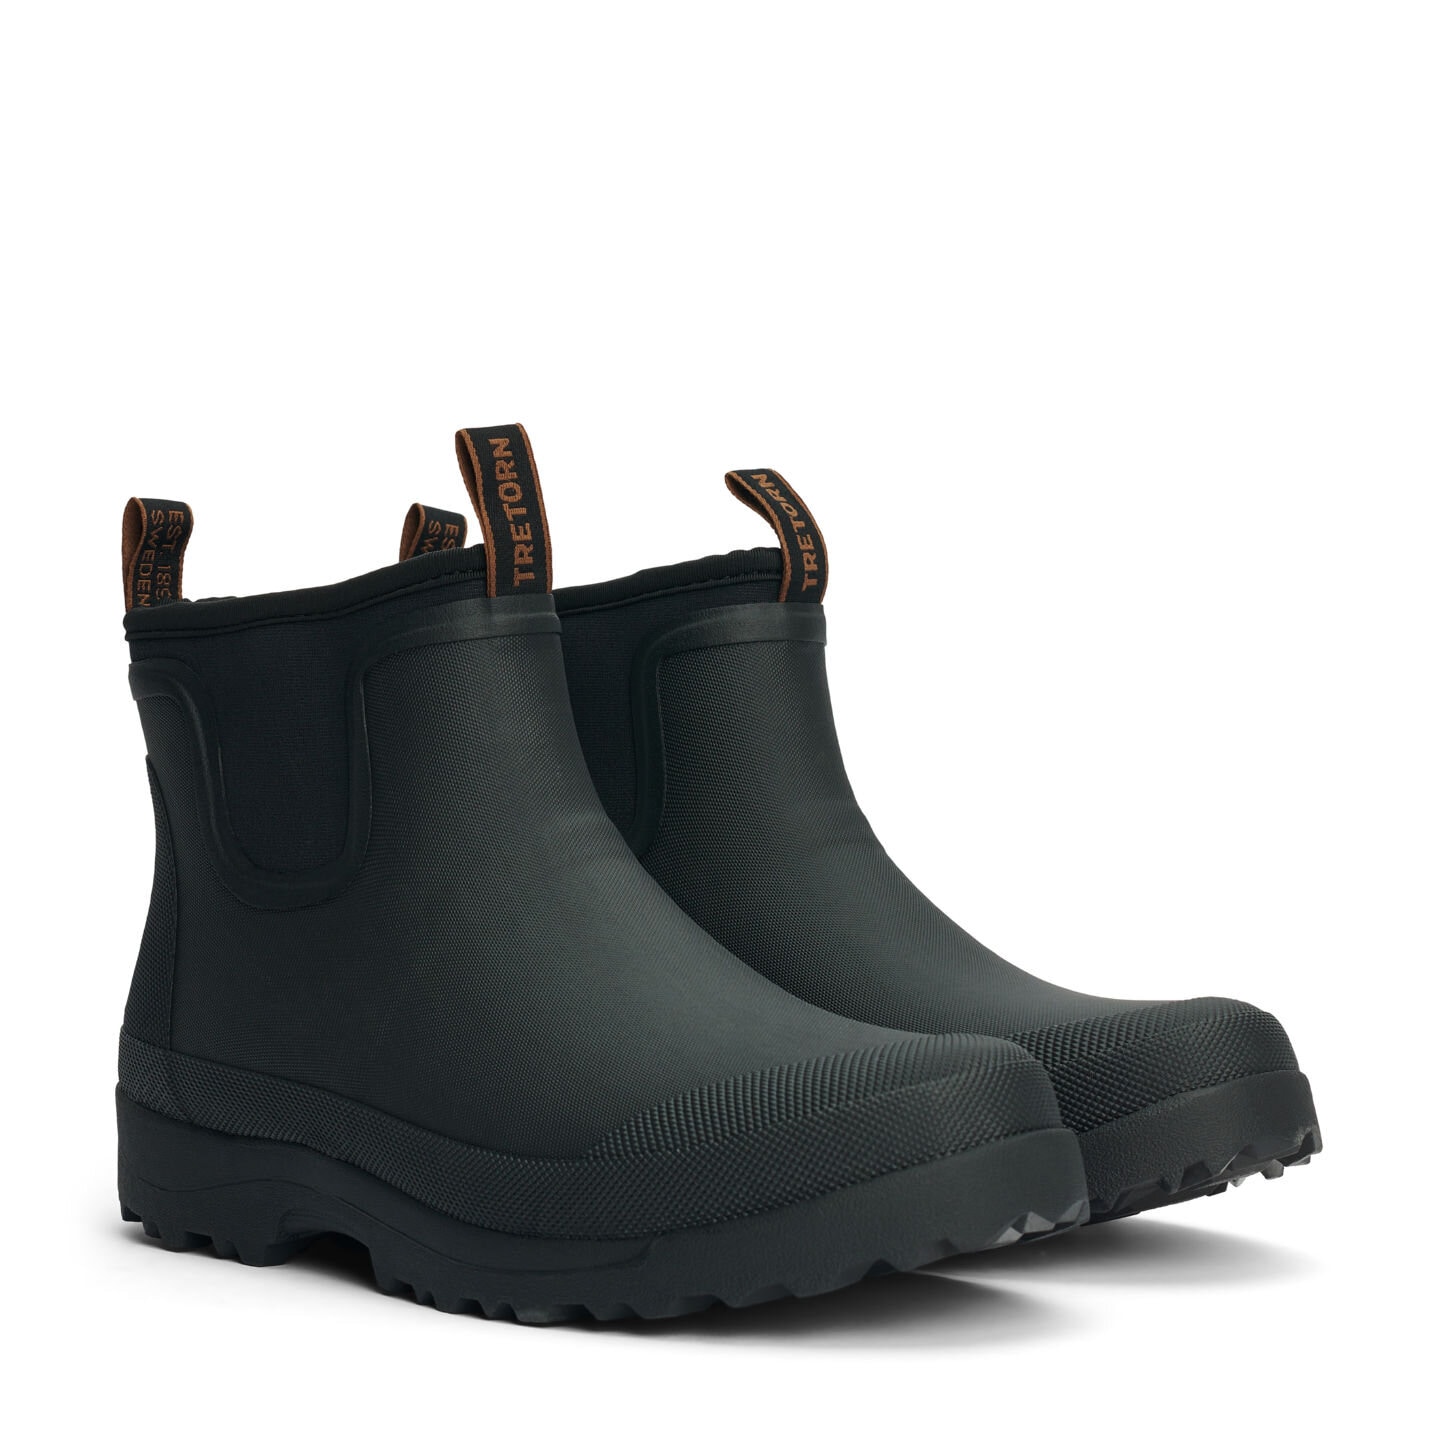 Terräng Low Neo Winter lined boot from Tretorn for men and women in the colour black.